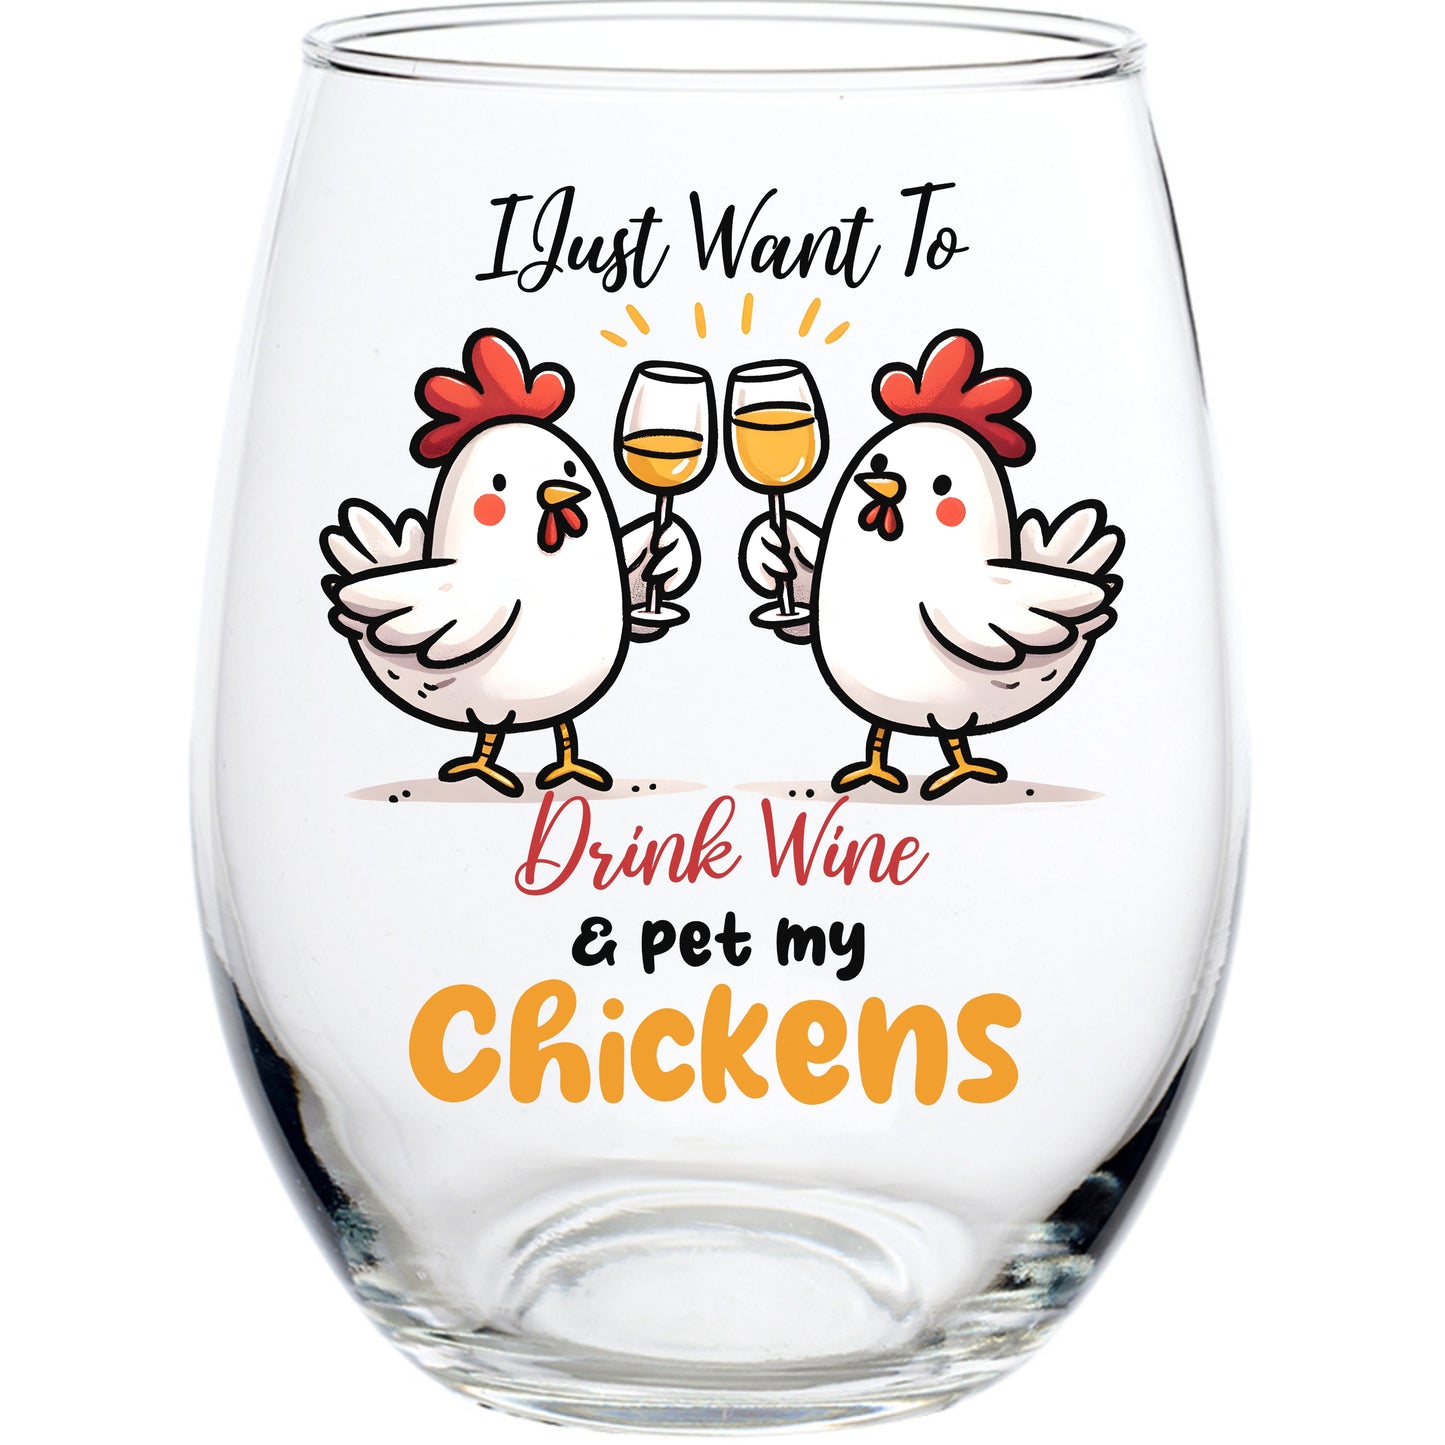 I Just Want to Drink Wine & Pet my Chickens STEMLESS WINE GLASS